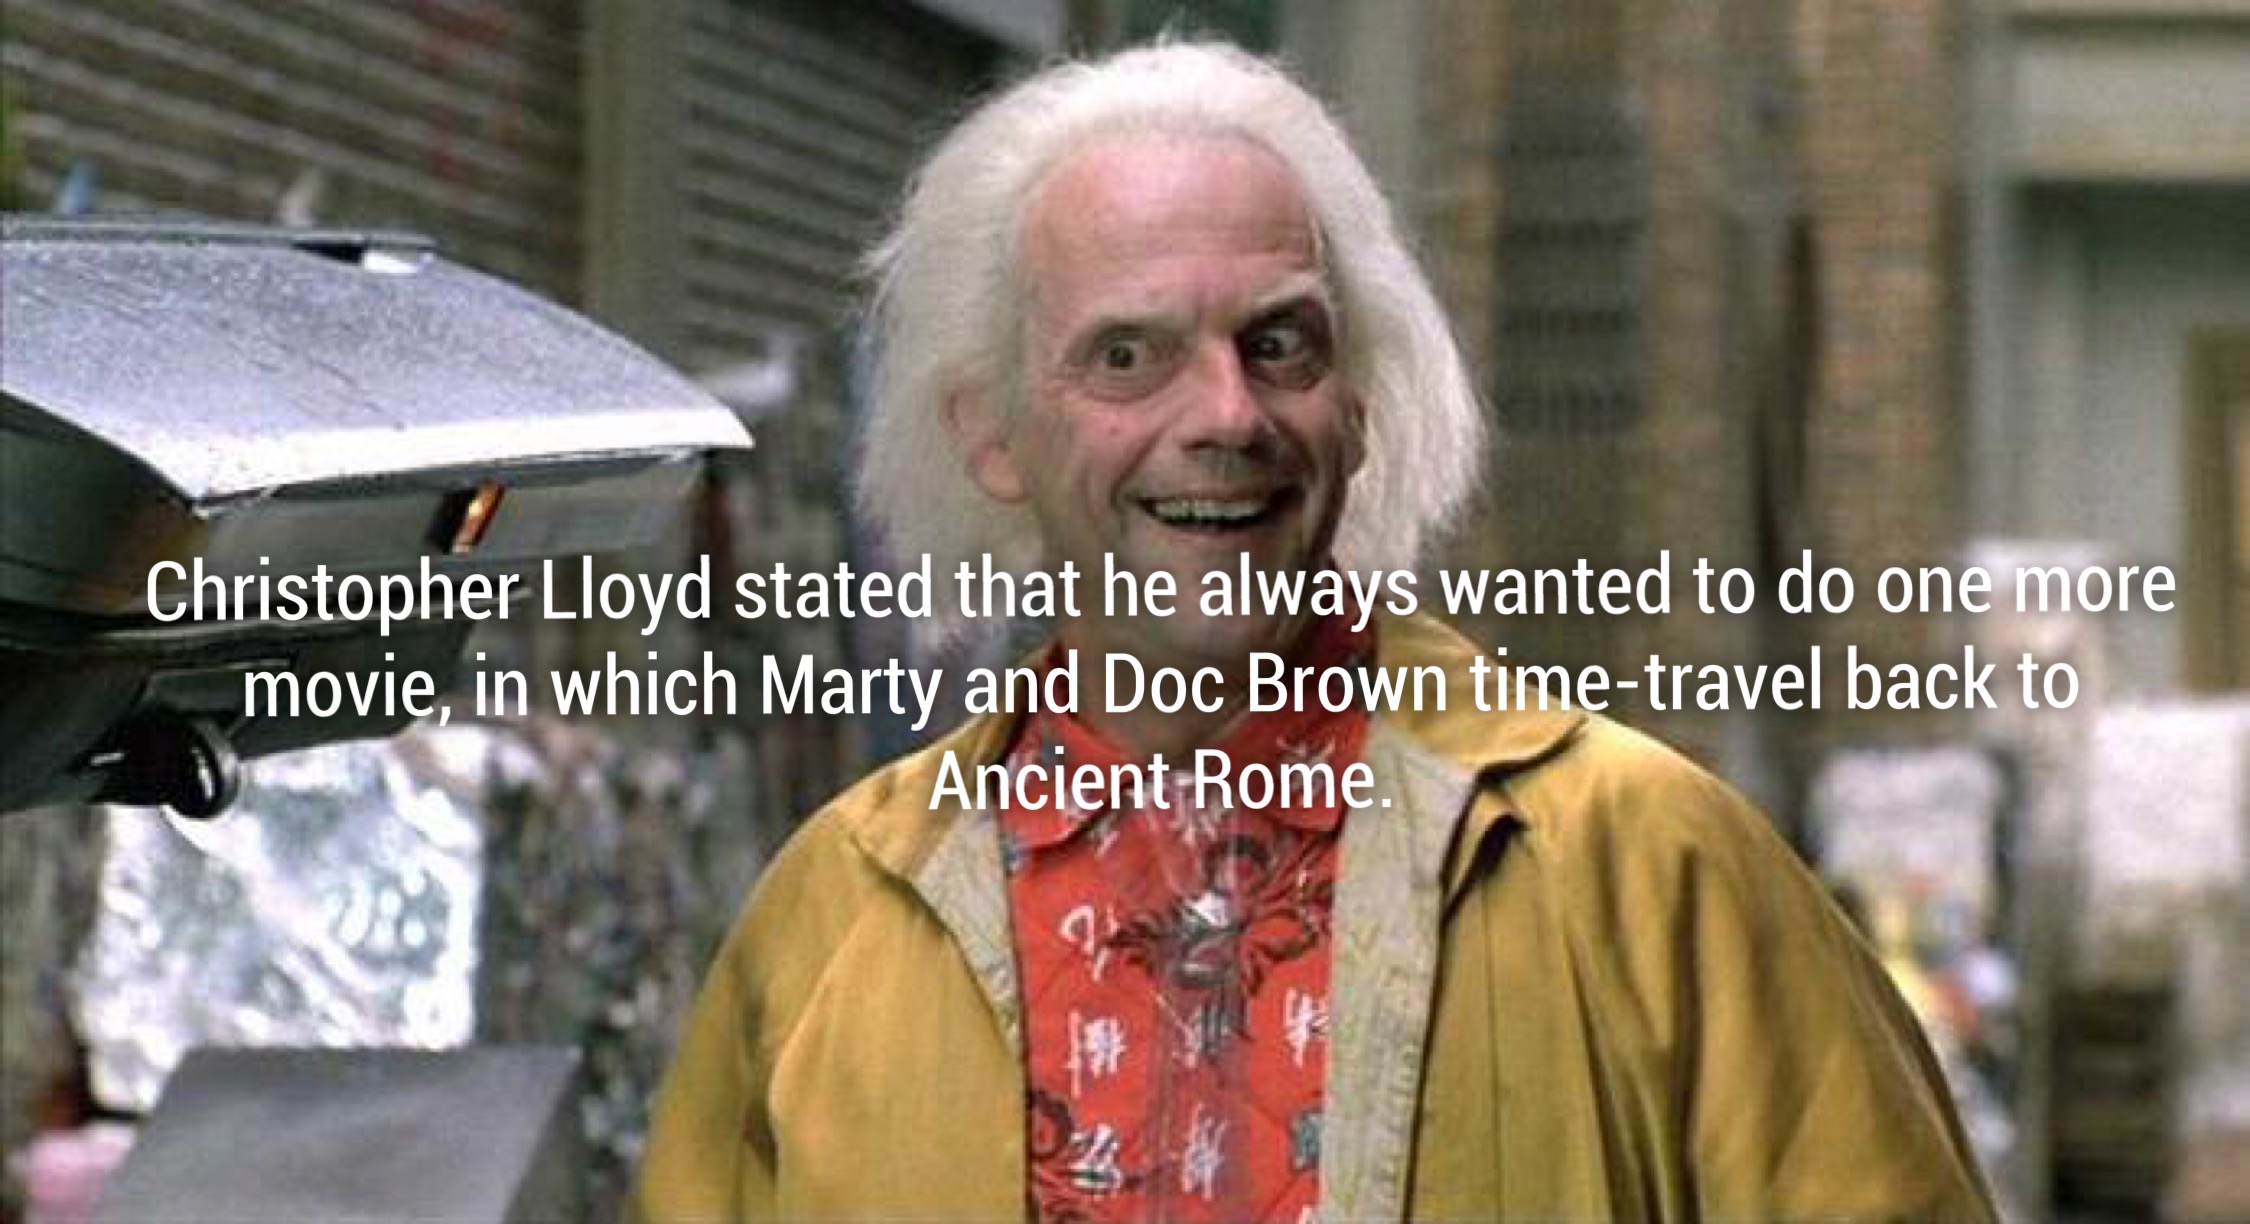 doc brown - Christopher Lloyd stated that he always wanted to do one more movie, in which Marty and Doc Brown timetravel back to Ancient Rome.